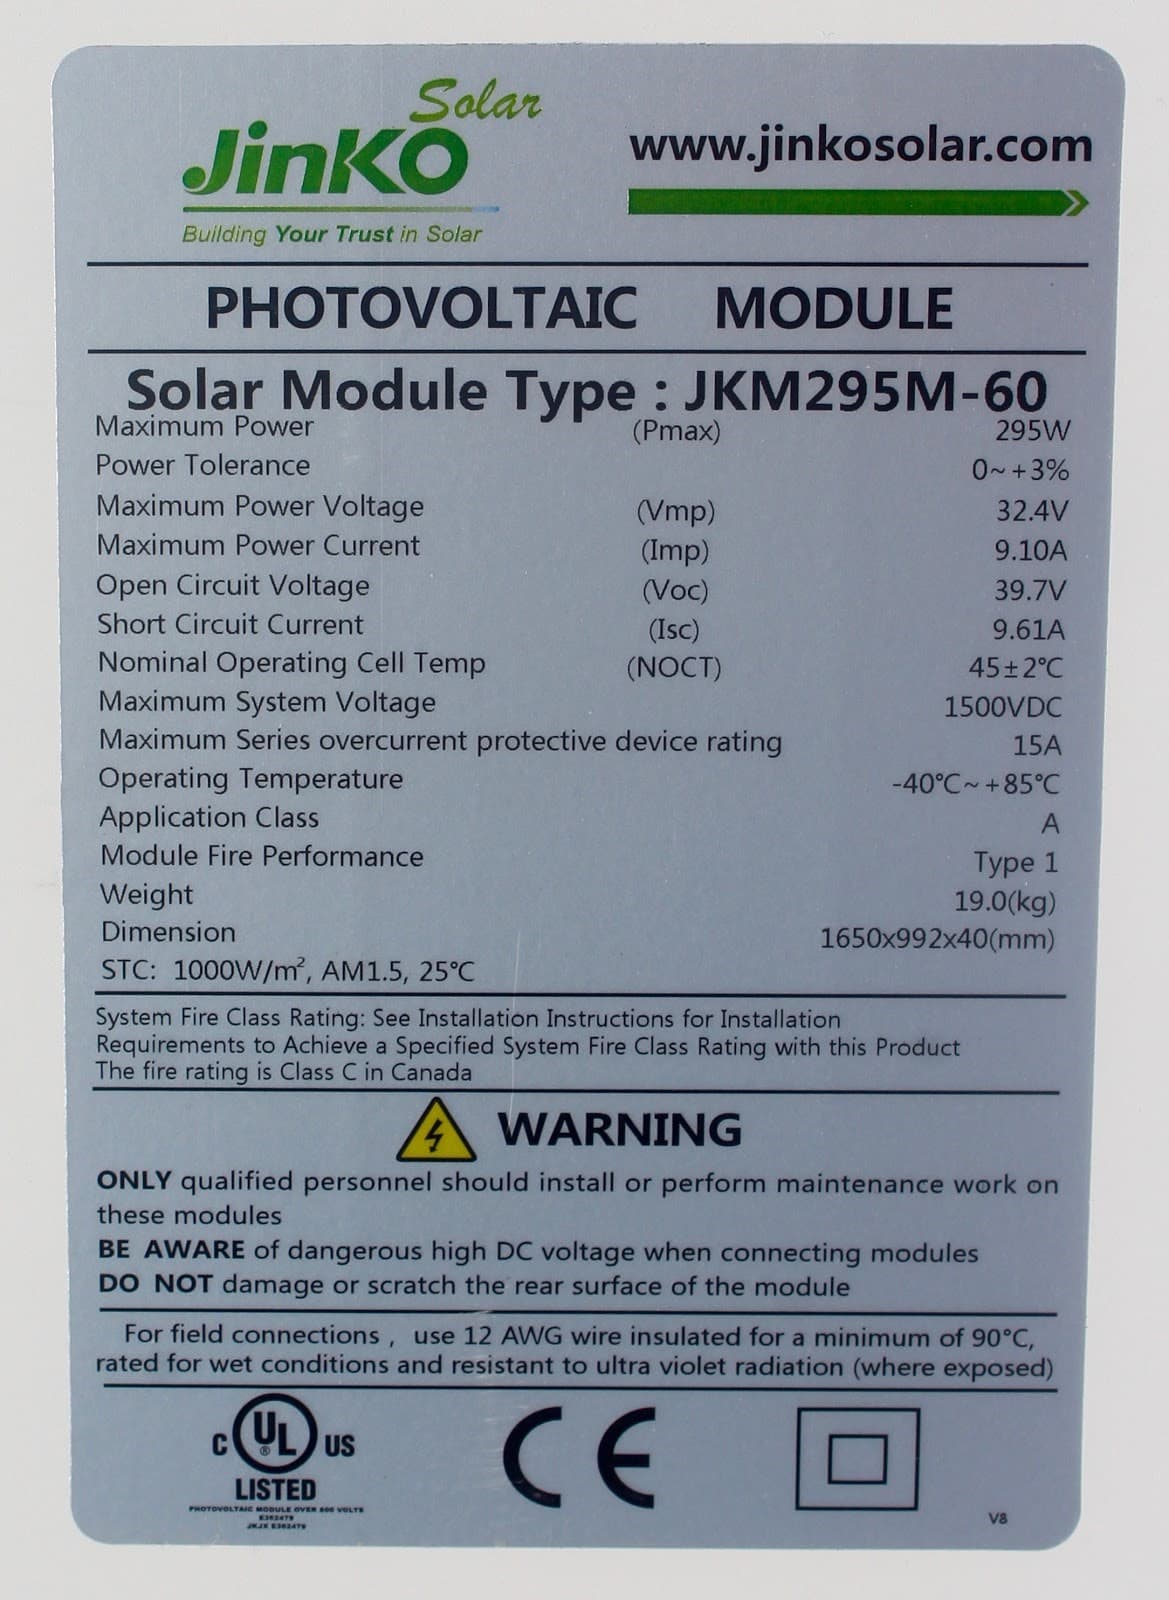 Solar
JinKO
www.jinkosolar.com
Building Your Trust in Solar
PHOTOVOLTAIC
MODULE
Solar Module Type : JKM295M-60
Maximum Power
(Pmax)
295W
Power Tolerance
0~+3%
Maximum Power Voltage
(Vmp)
(Imp)
32.4V
Maximum Power Current
9.10A
Open Circuit Voltage
(Voc)
39.7V
Short Circuit Current
(Isc)
9.61A
Nominal Operating Cell Temp
Maximum System Voltage
Maximum Series overcurrent protective device rating
Operating Temperature
Application Class
(NOCT)
45 2°C
1500VDC
15A
-40°C +85°C
2.
Module Fire Performance
Туpe 1
19.0(kg)
1650x992x40(mm)
Weight
Dimension
STC: 1000W/m, AM1.5, 25°C
System Fire Class Rating: See Installation Instructions for Installation
Requirements to Achieve a Specified System Fire Class Rating with this Product
The fire rating is Class C in Canada
A WARNING
ONLY qualified personnel should install or perform maintenance work on
these modules
BE AWARE of dangerous high DC voltage when connecting modules
DO NOT damage or scratch the rear surface of the module
For field connections, use 12 AWG wire insulated for a minimum of 90°C,
rated for wet conditions and resistant to ultra violet radiation (where exposed)
UL
CE
US
LISTED
PHOTOVOLTAIC MODULE OVER S00 VOLTS
V8
JKJK ES47S
